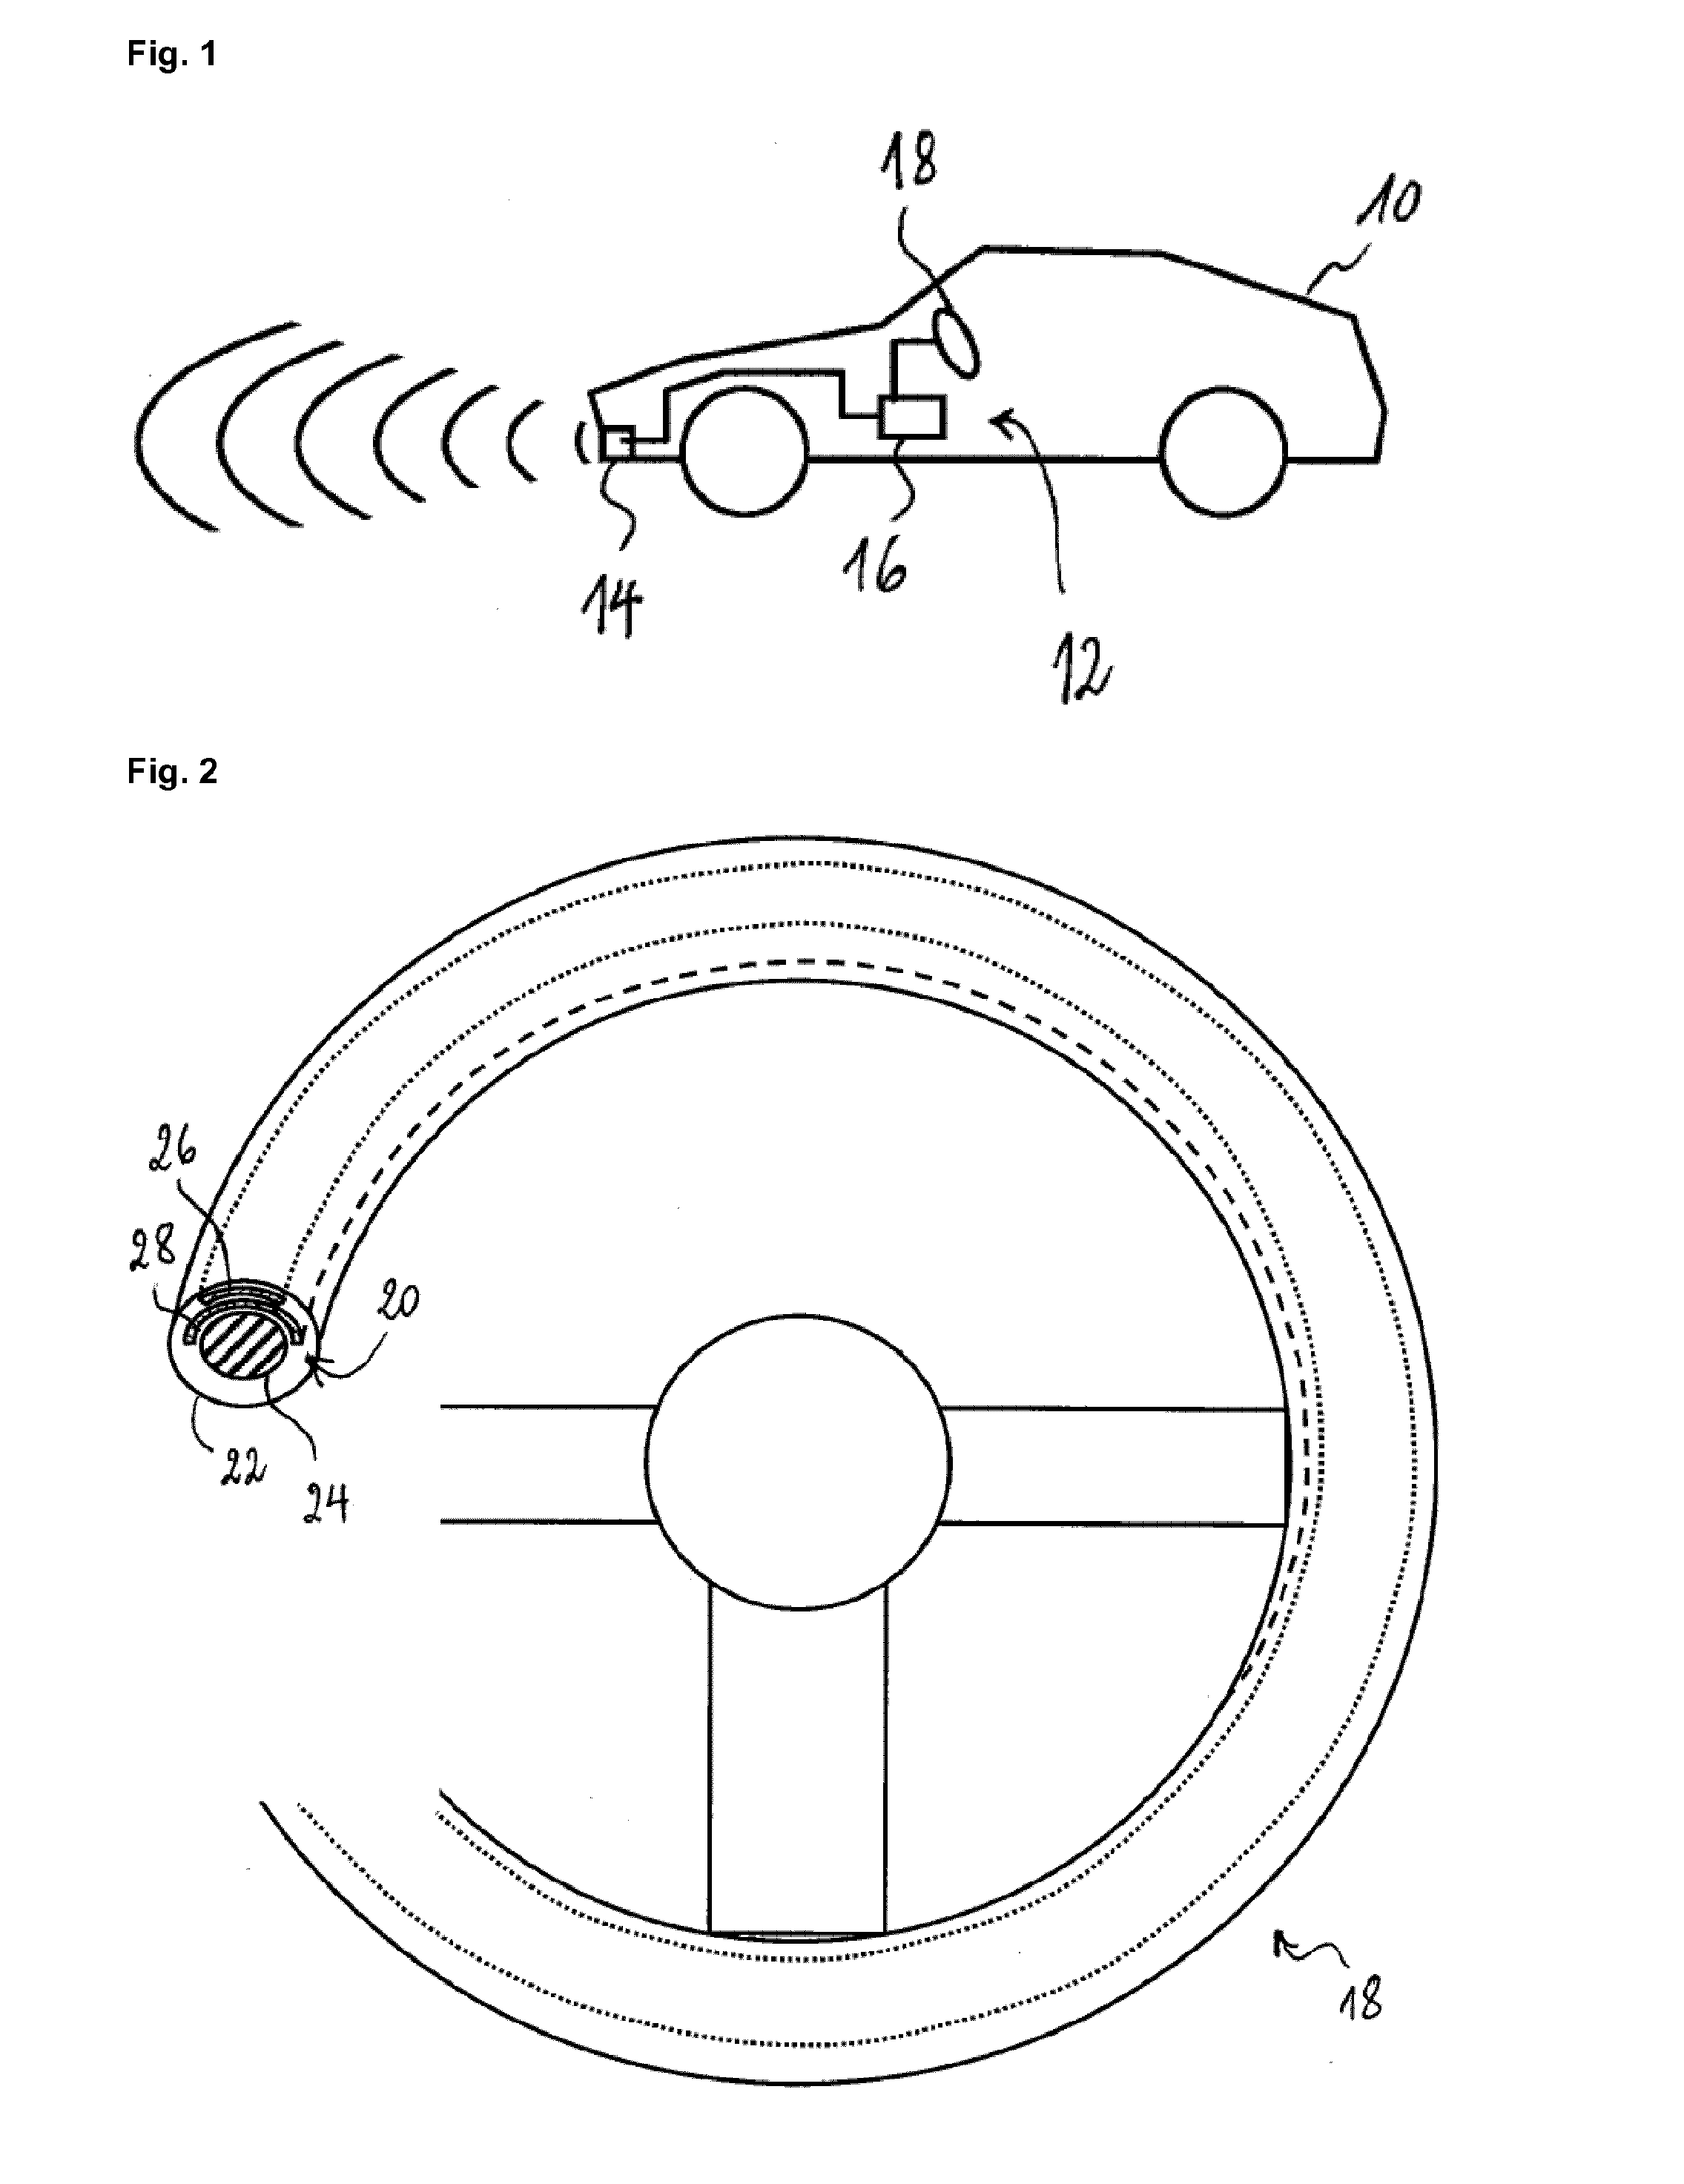 Capacitive detection device